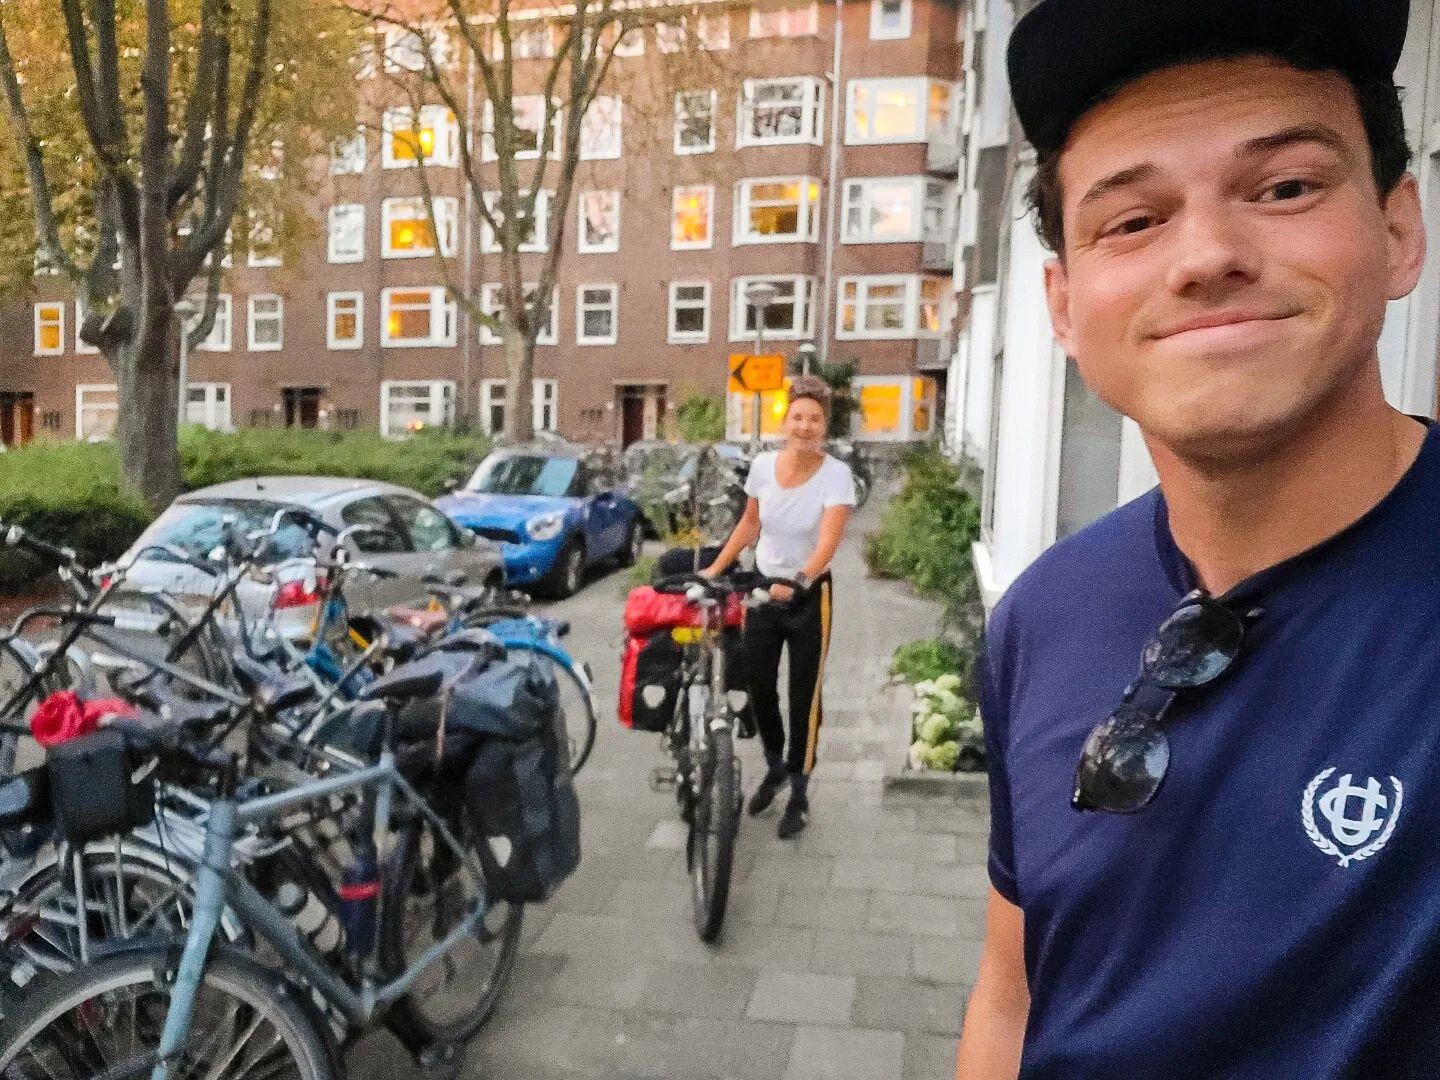 Ready for our next cycling adventure!

We just arrived at Schiphol Airport and packed our bikes into boxes. Everything went much smoother than expected and now all that's left to do is to wait to catch our flight to MOROCCO!🇲🇦

3 weeks of holidays 